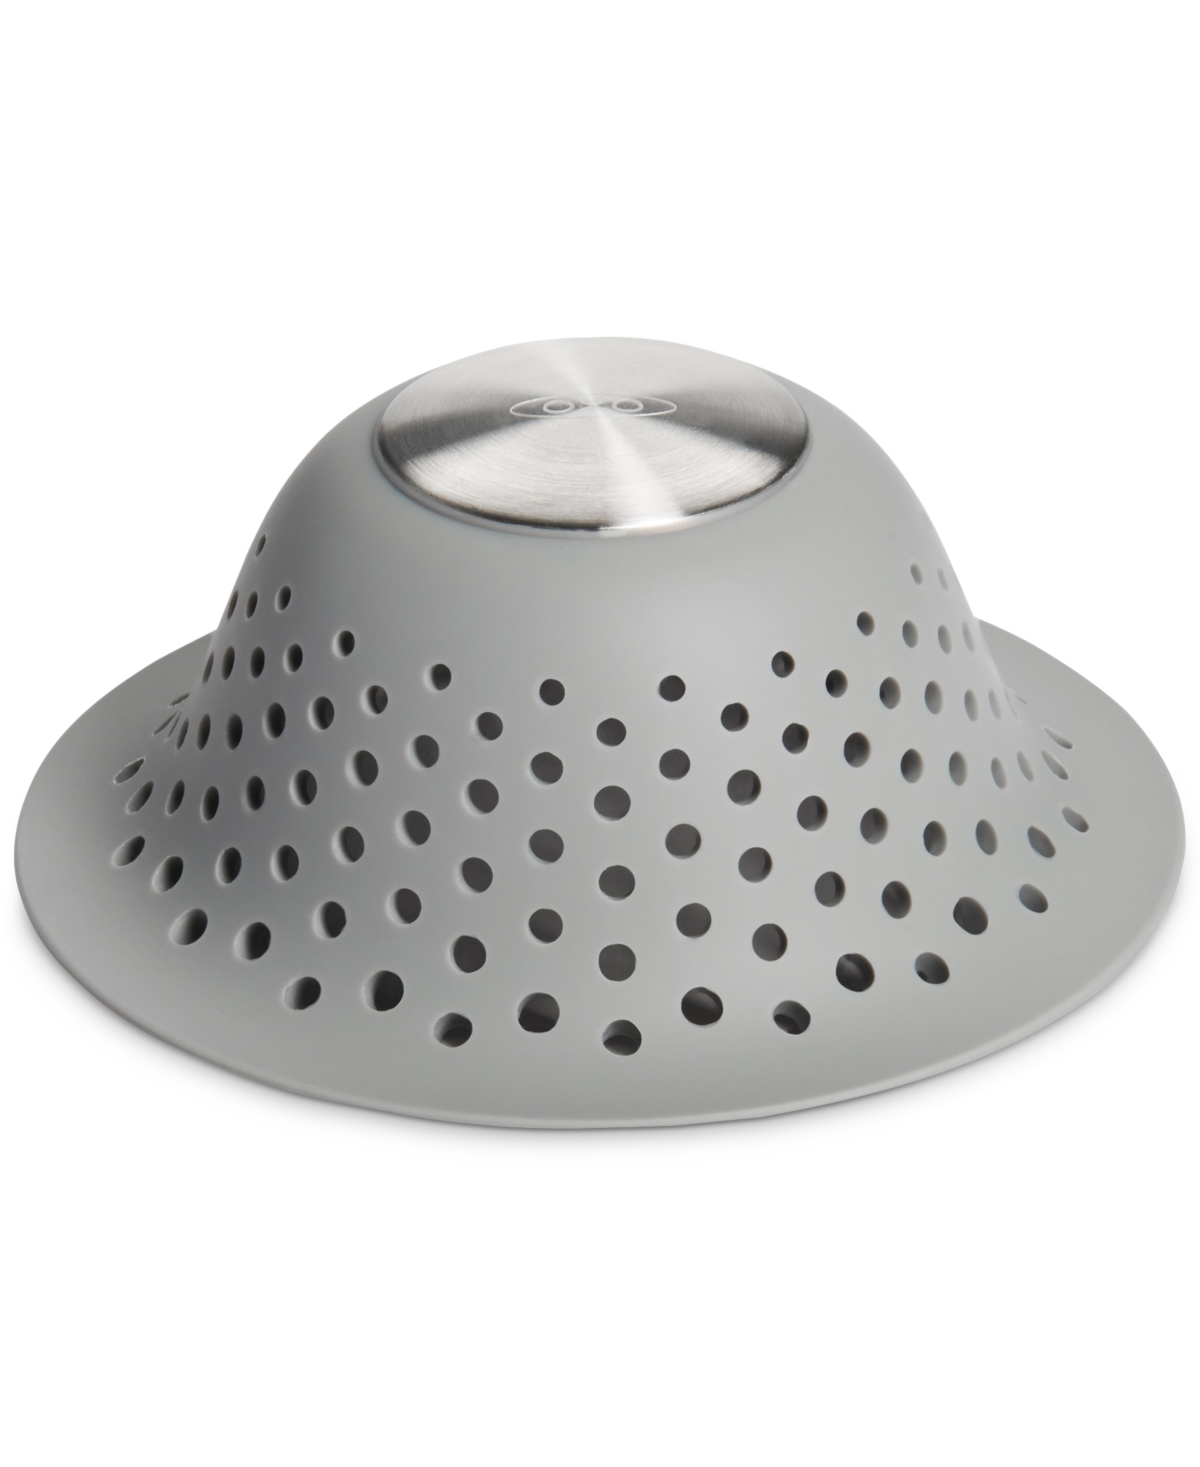 Oxo Good Grips Silicone Pop-up Drain Protector In Grey